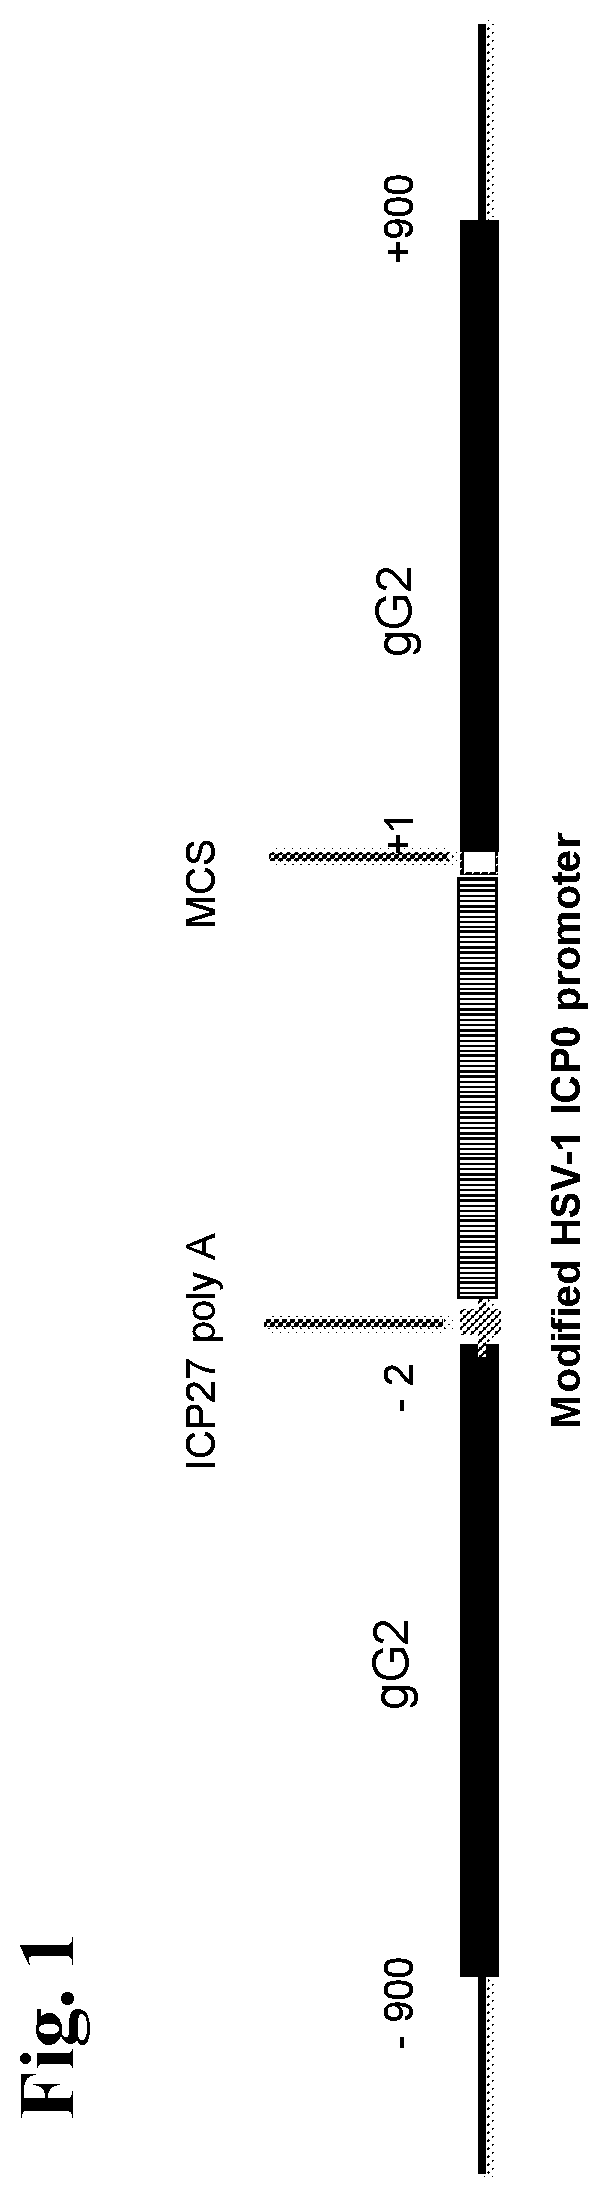 Recombinant Herpes Simplex Virus-2 expressing glycoprotein B and D antigens